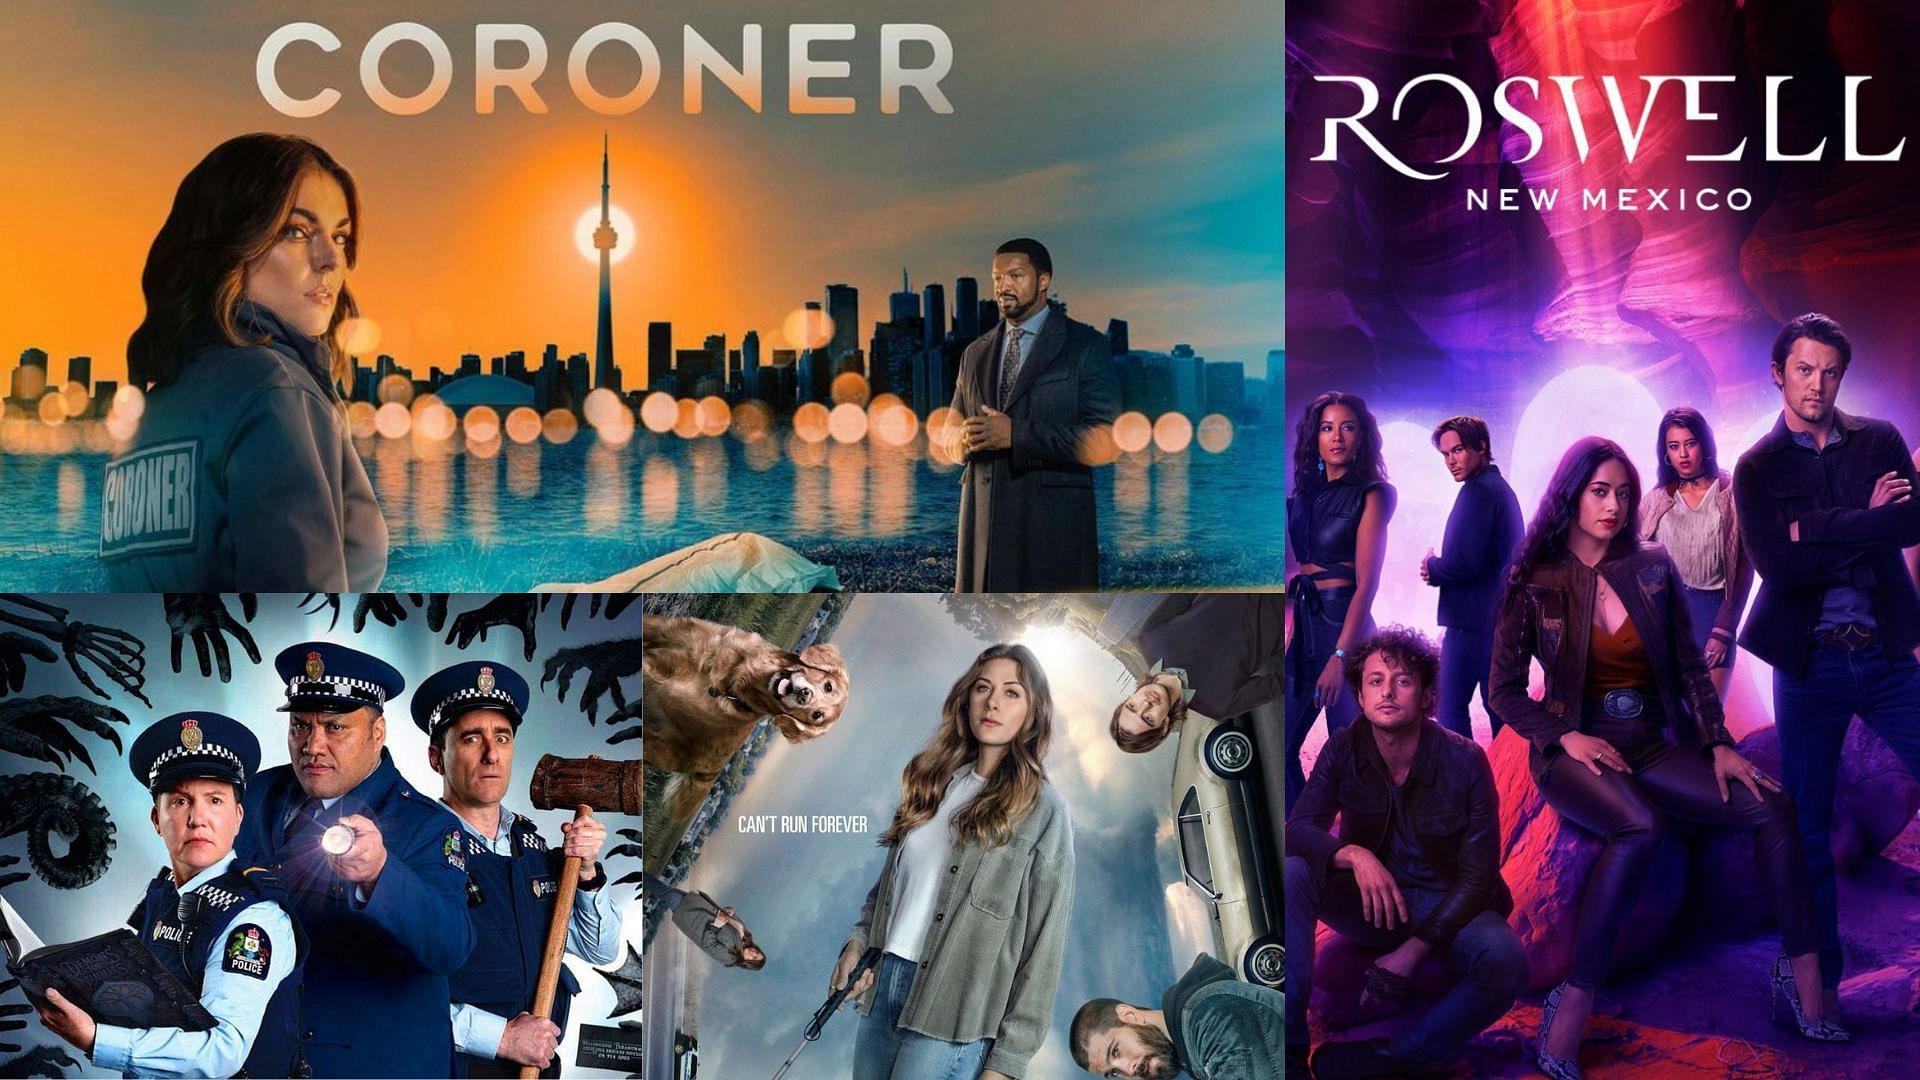 The CW Summer 2022 schedule includes shows such as Coroner, In The Dark, Wellington Paranormal, and Rosewell, New Mexico (Image via @cwrosewellnm/Instagram, @CWshows/Twitter, @coronercbc/Instagram)